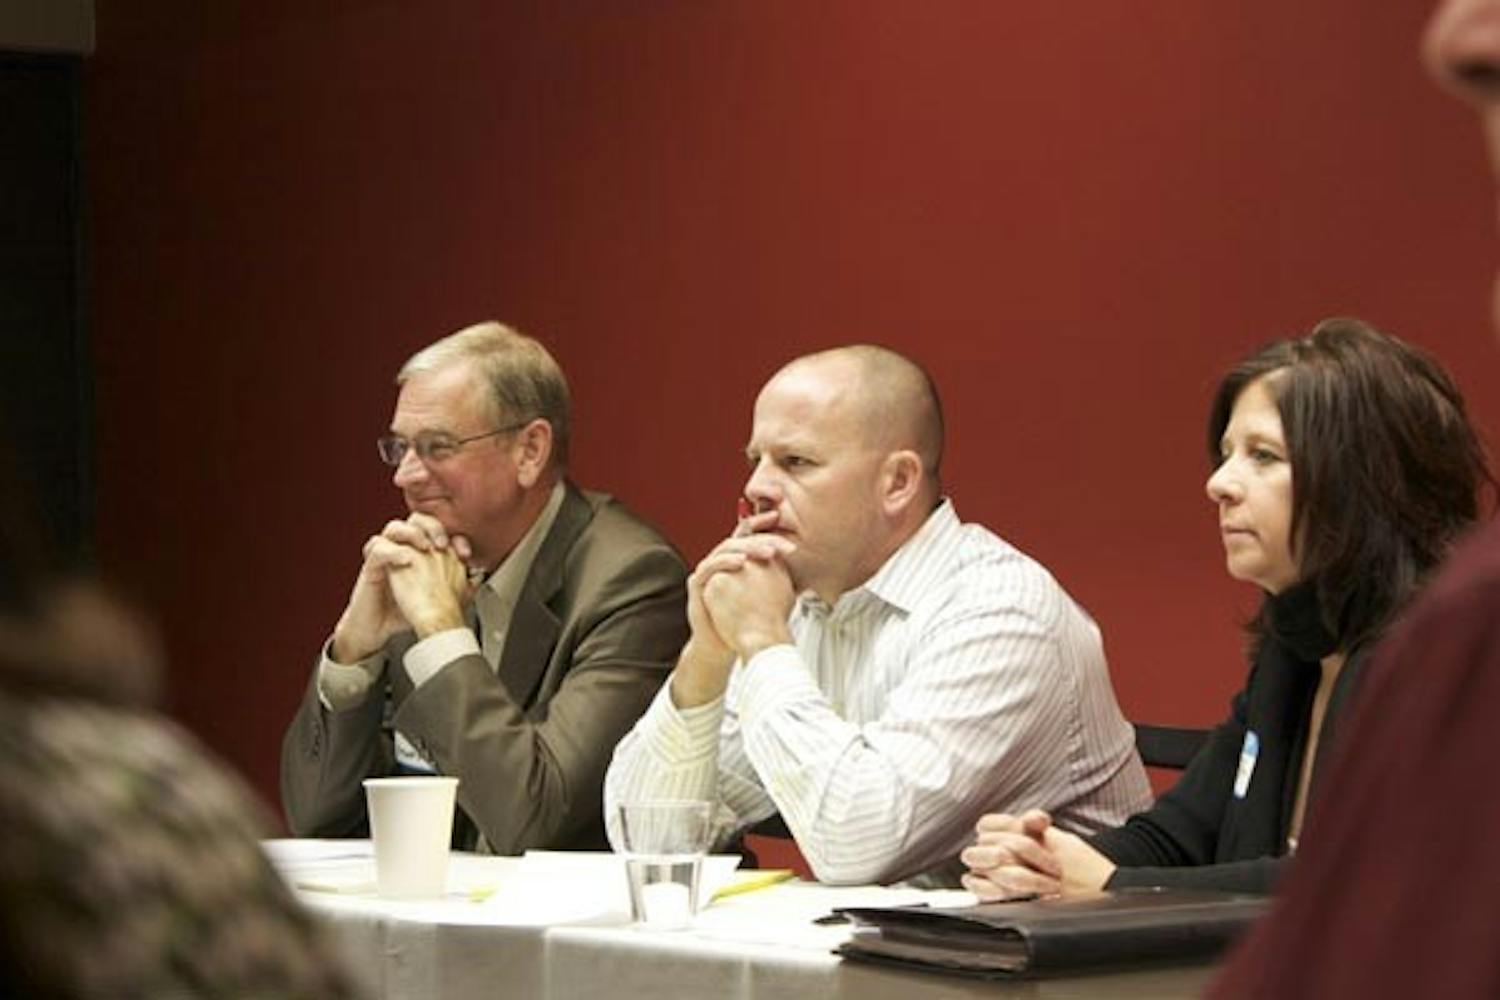 LOCAL OWNERS: (left to right) Jim Mapstead of Local First Arizona, Rep. Chad Campbell, D-Phoenix, and Kimber Lanning, of Local First Arizona, held a discussion Tuesday for small business owners. (Photo by Jessica Weisel)